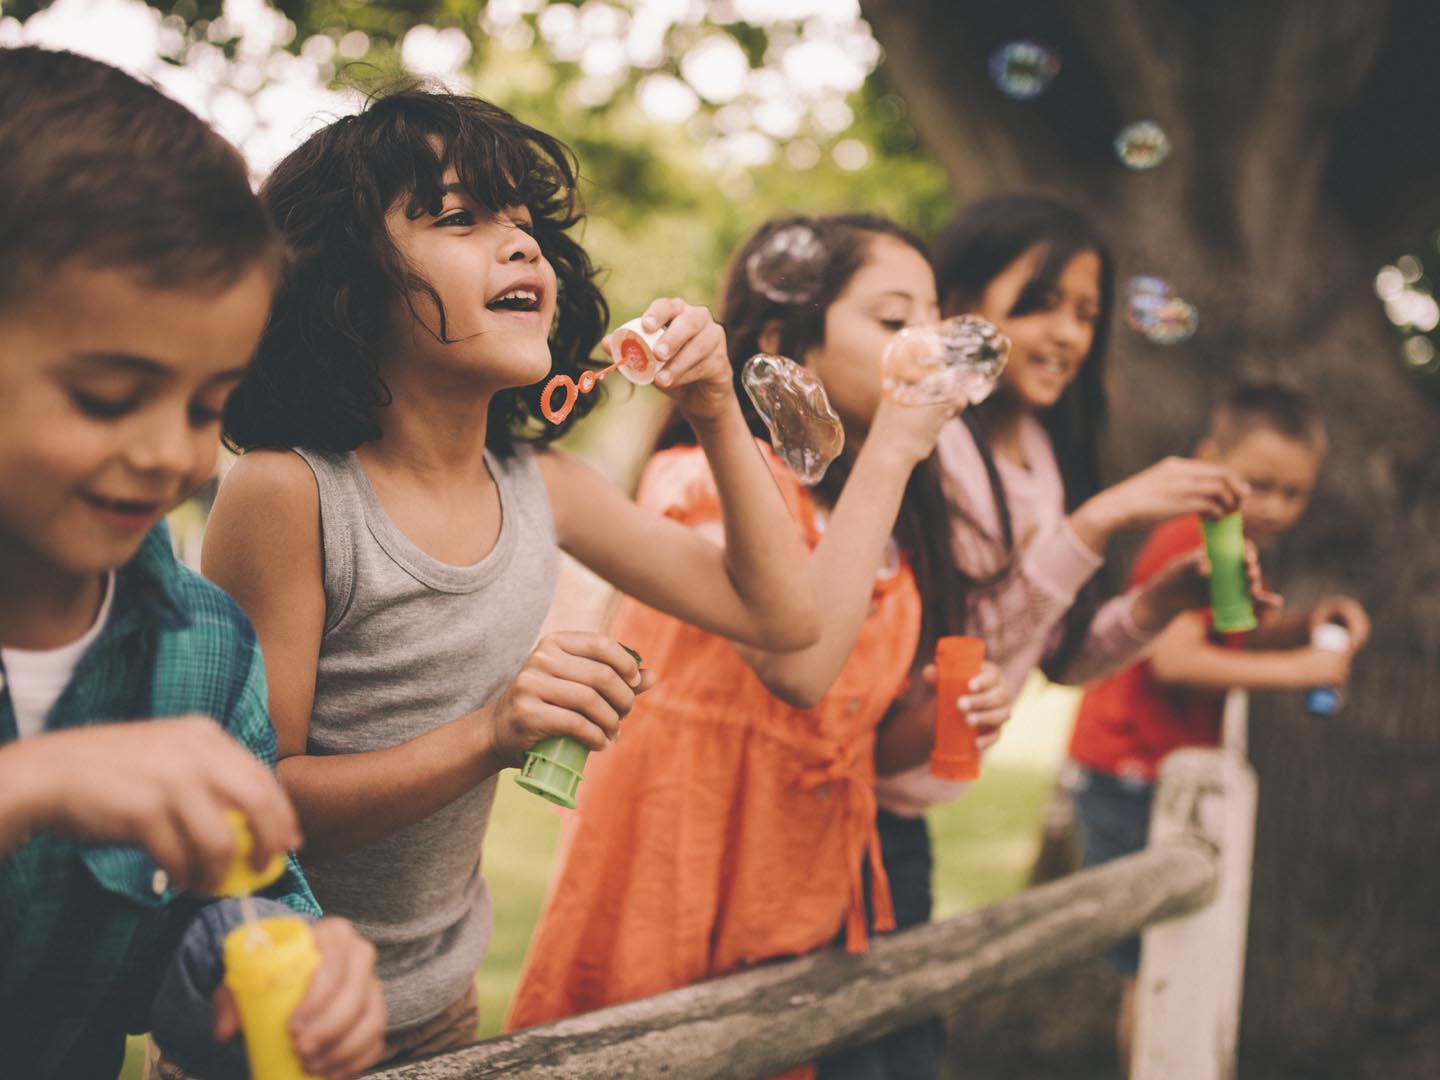 Long haired hispanic boy laughing and having fun with his friends standing on a wooden fence in a summer park blowing bubbles, with a vintage develop